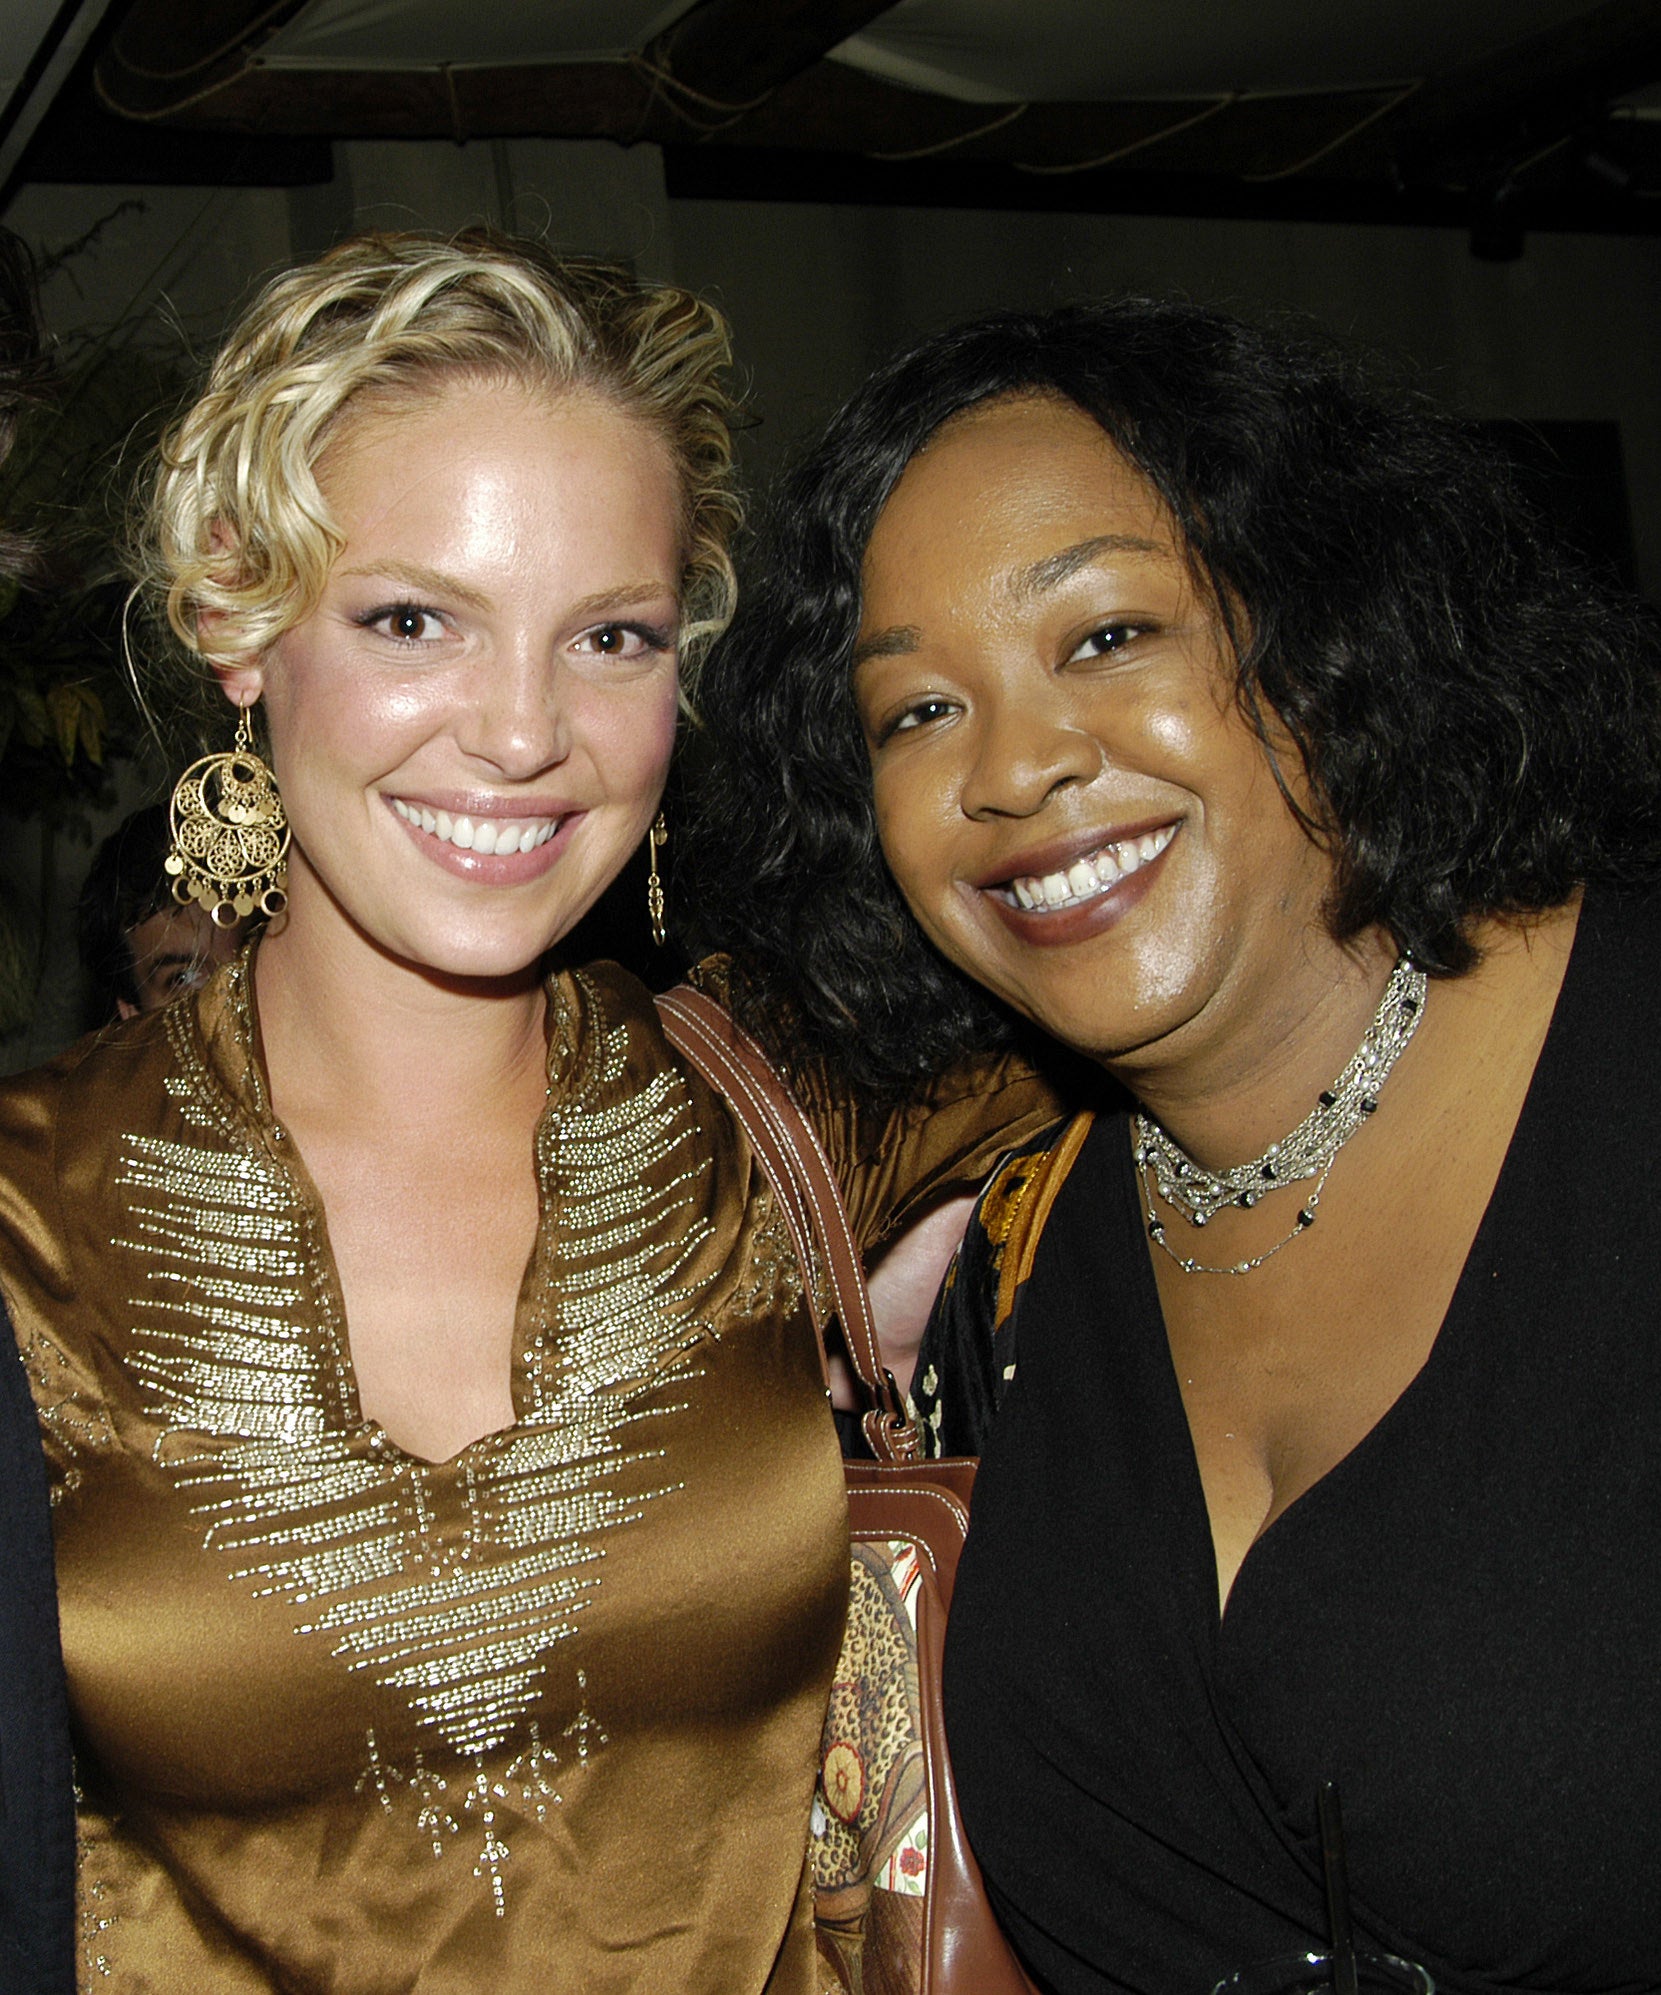 Katherine Heigl and Shonda Rhimes posing together at an event in the mid &#x27;00s